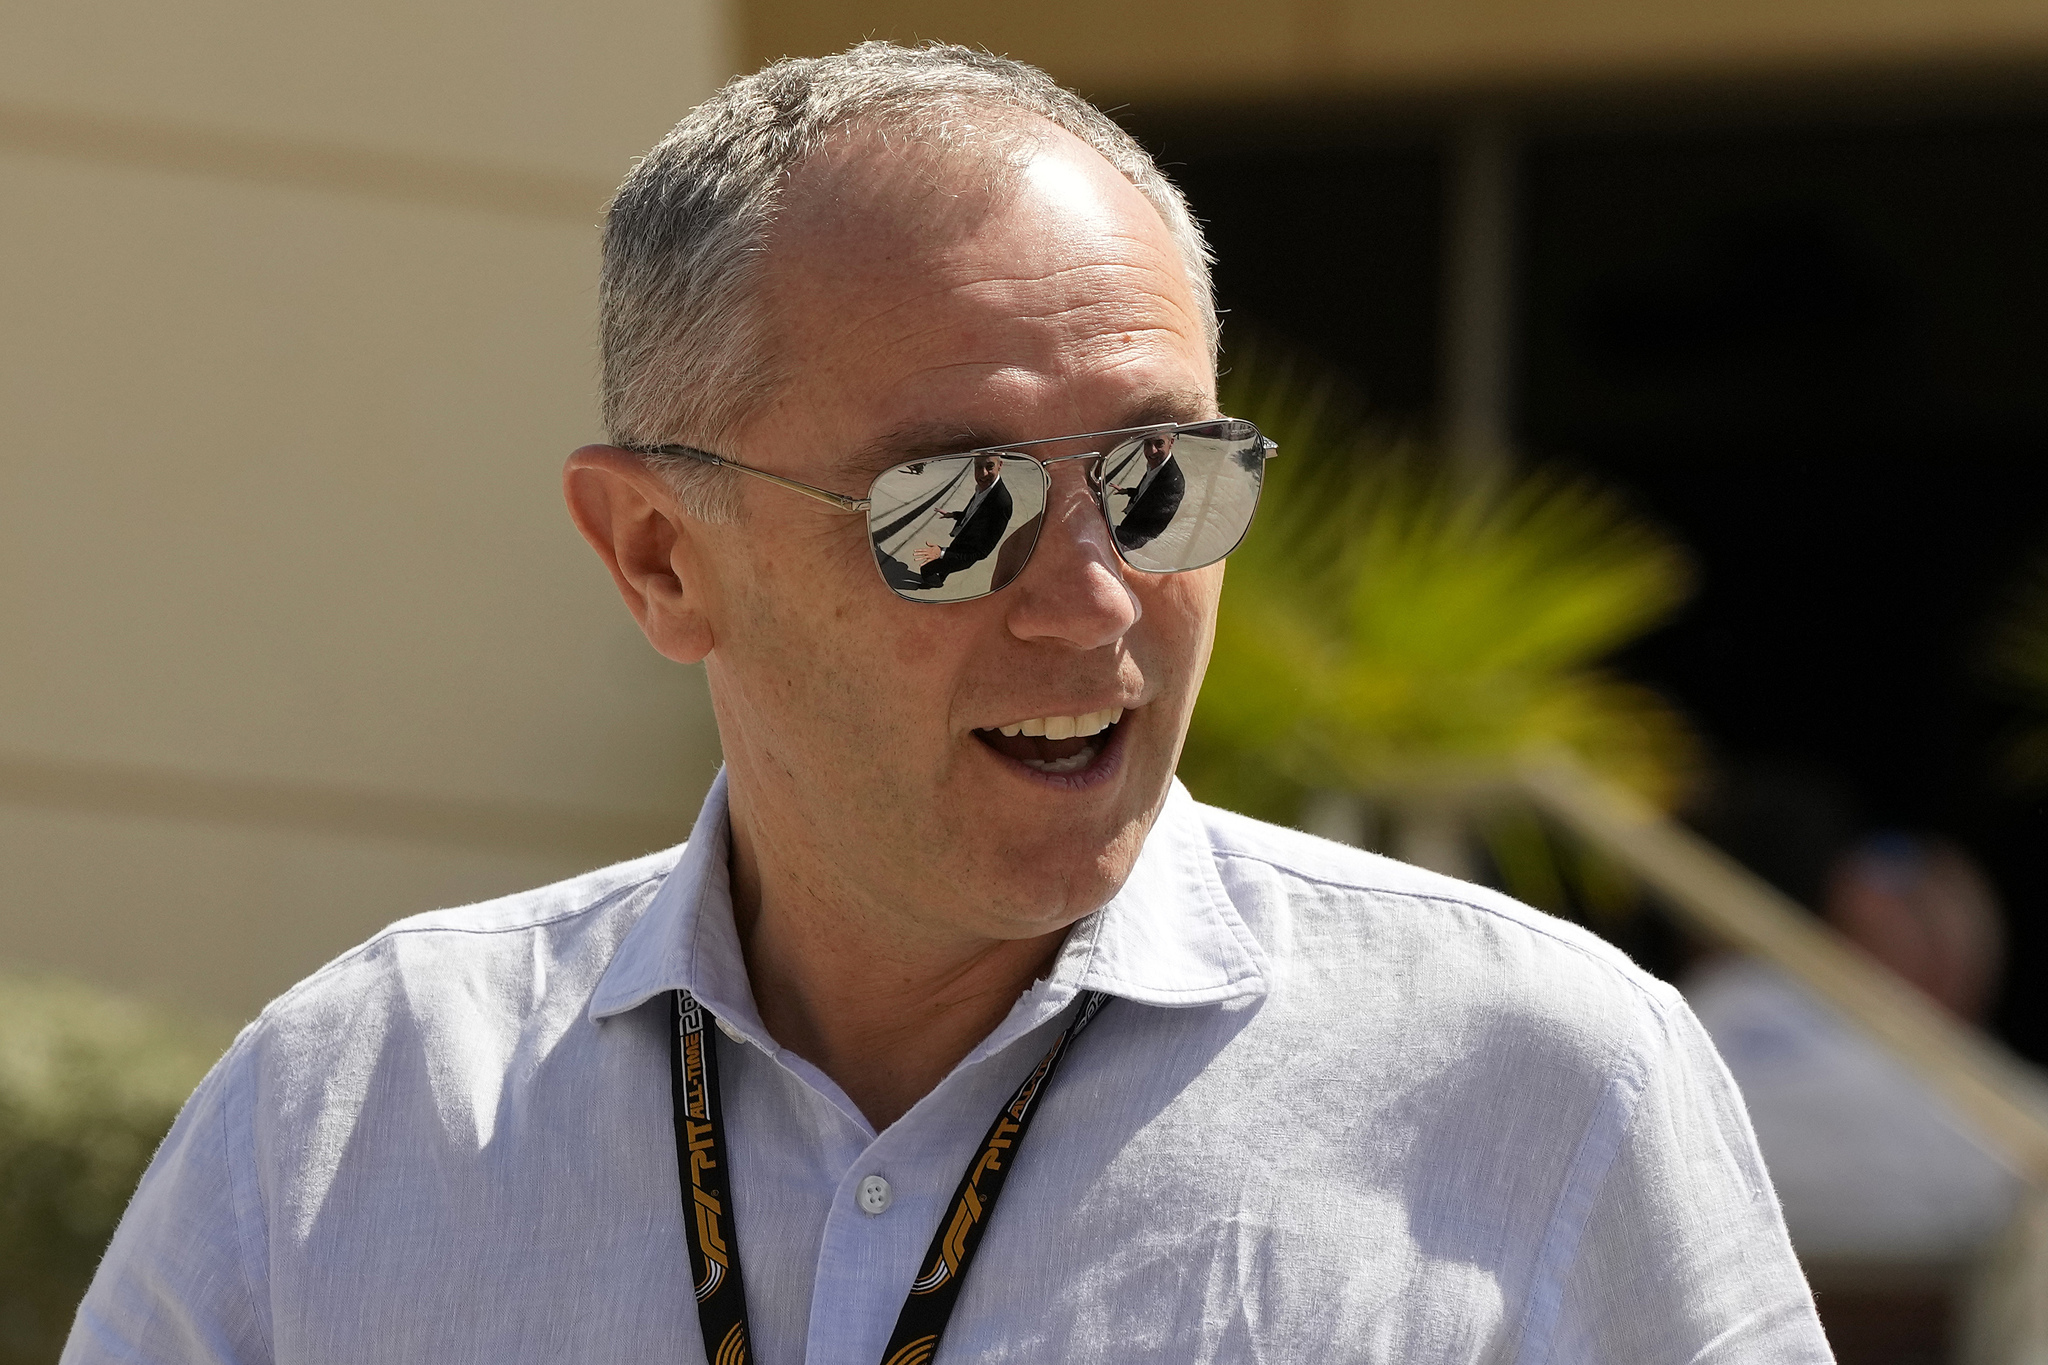 Stefano lt;HIT gt;Domenicali lt;/HIT gt;, President Chief Executive Officer of the FIA, arrives at the Bahrain International Circuit in Sakhir, Bahrain, Thursday, March 2, 2023. The Bahrain GP will be held on Sunday March 5, 2023.(AP Photo/Frank Augstein)